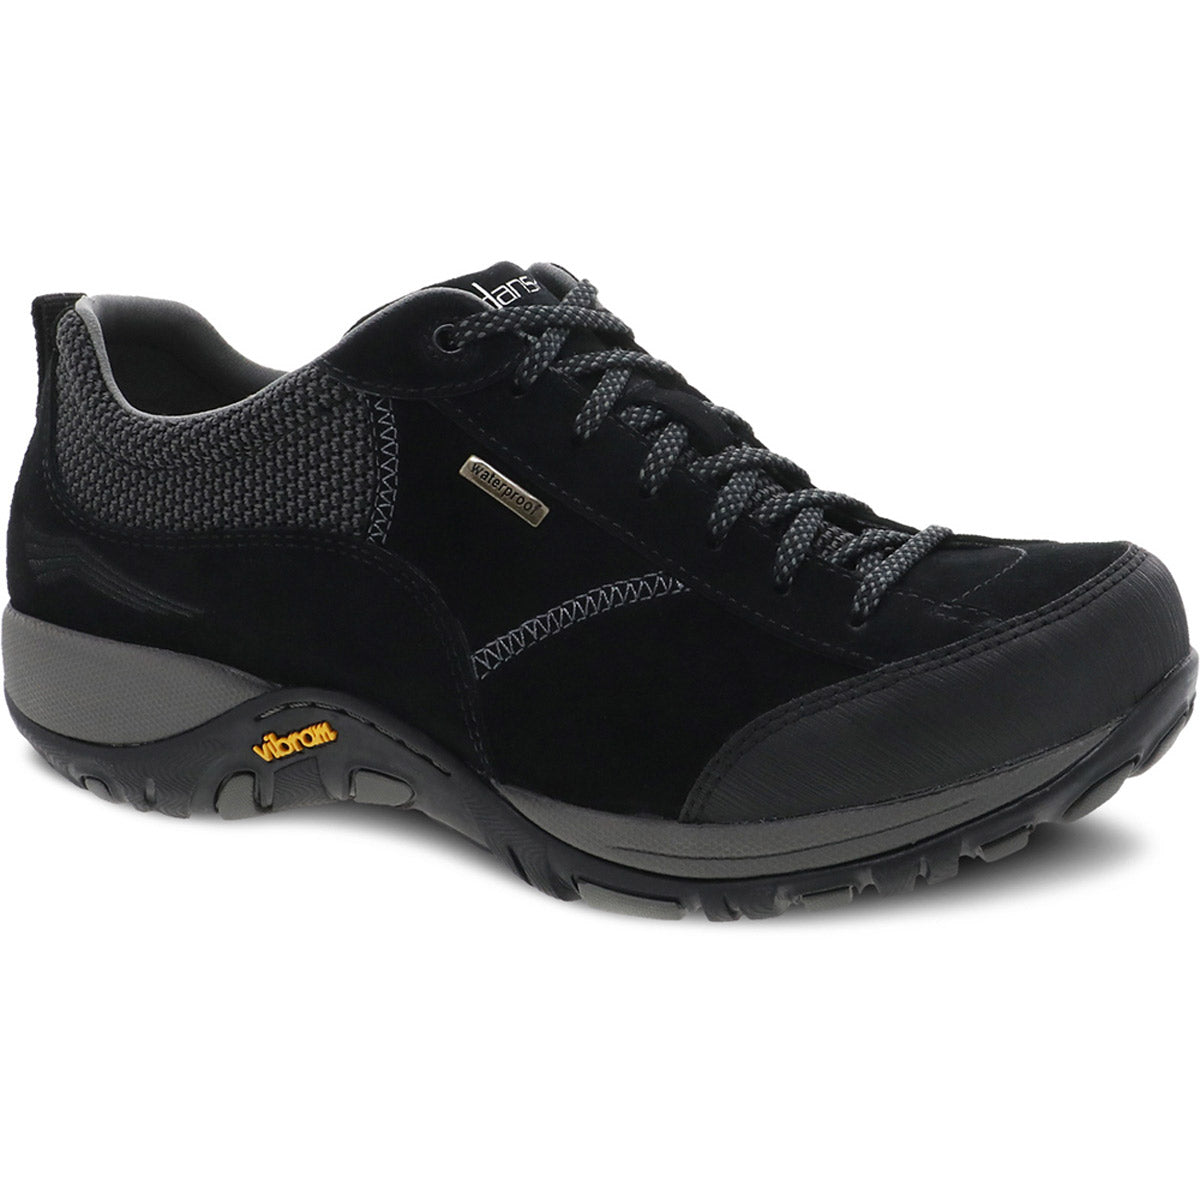 A black hiking shoe with a Vibram® rubber outsole and waterproof leather uppers, like the Dansko Paisley Black/Black Suede - Women.